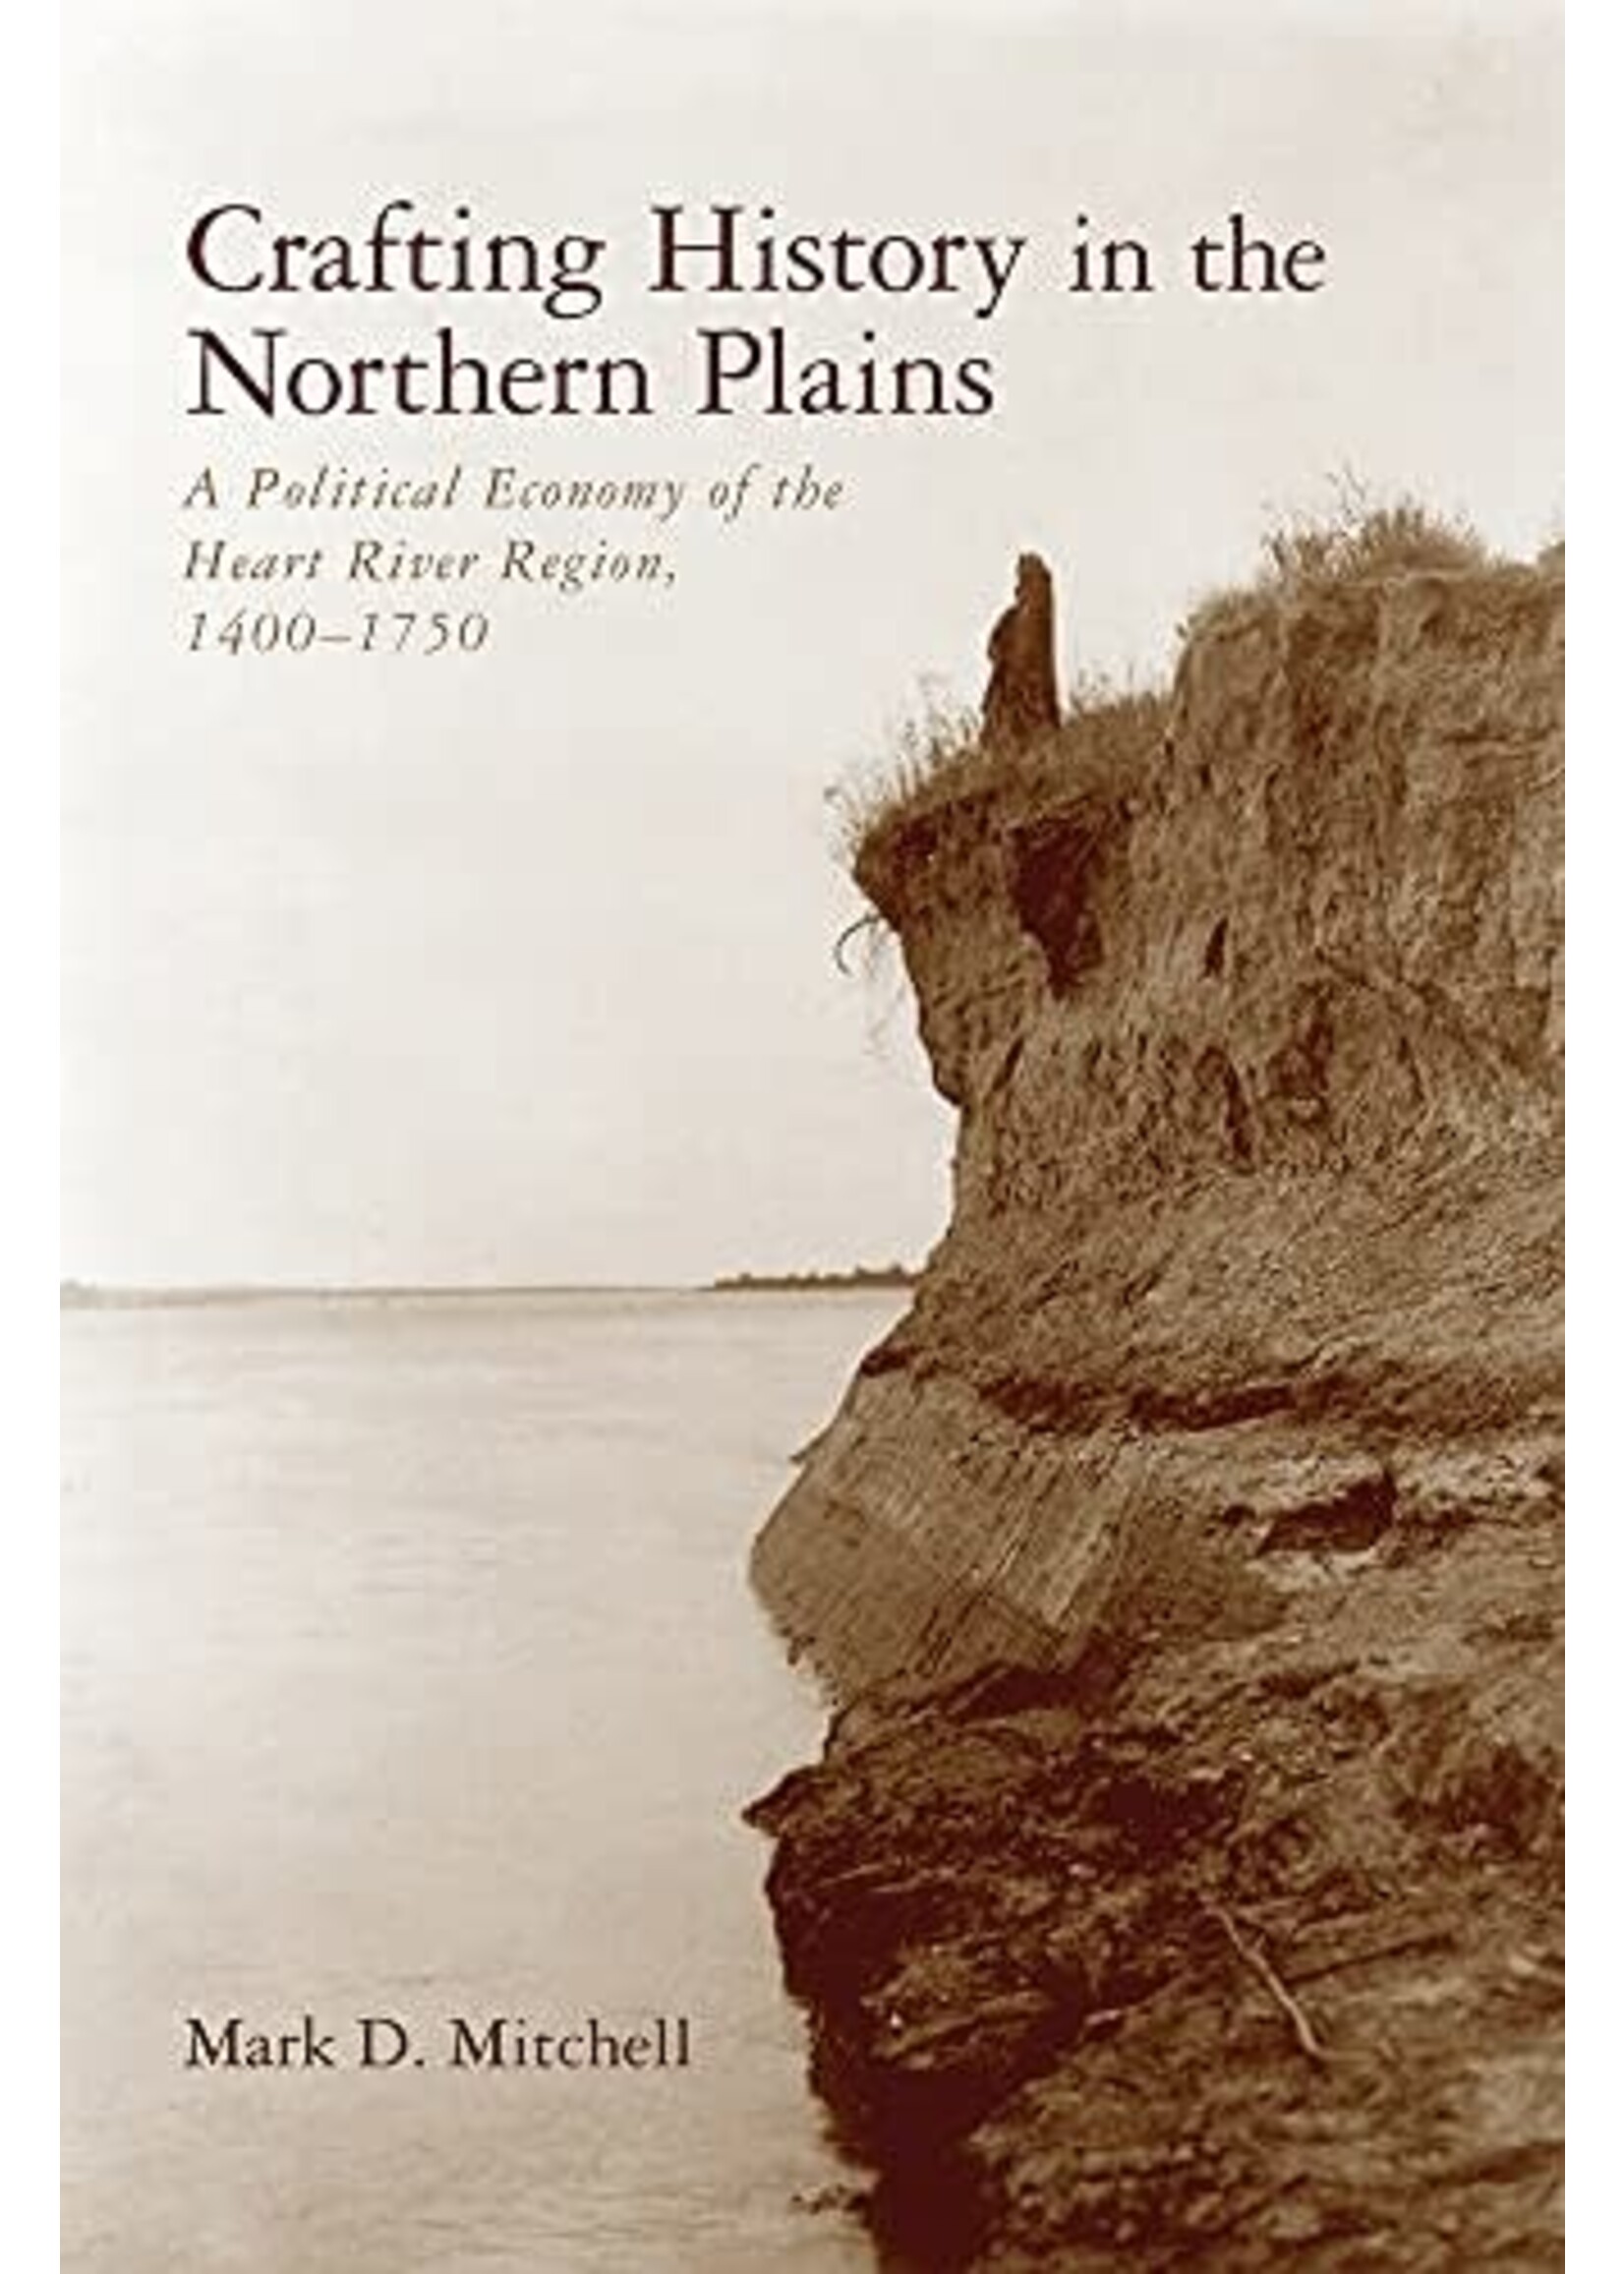 Crafting History in the North Plains: A Political Economy of the Heart River Region, 1400-1750